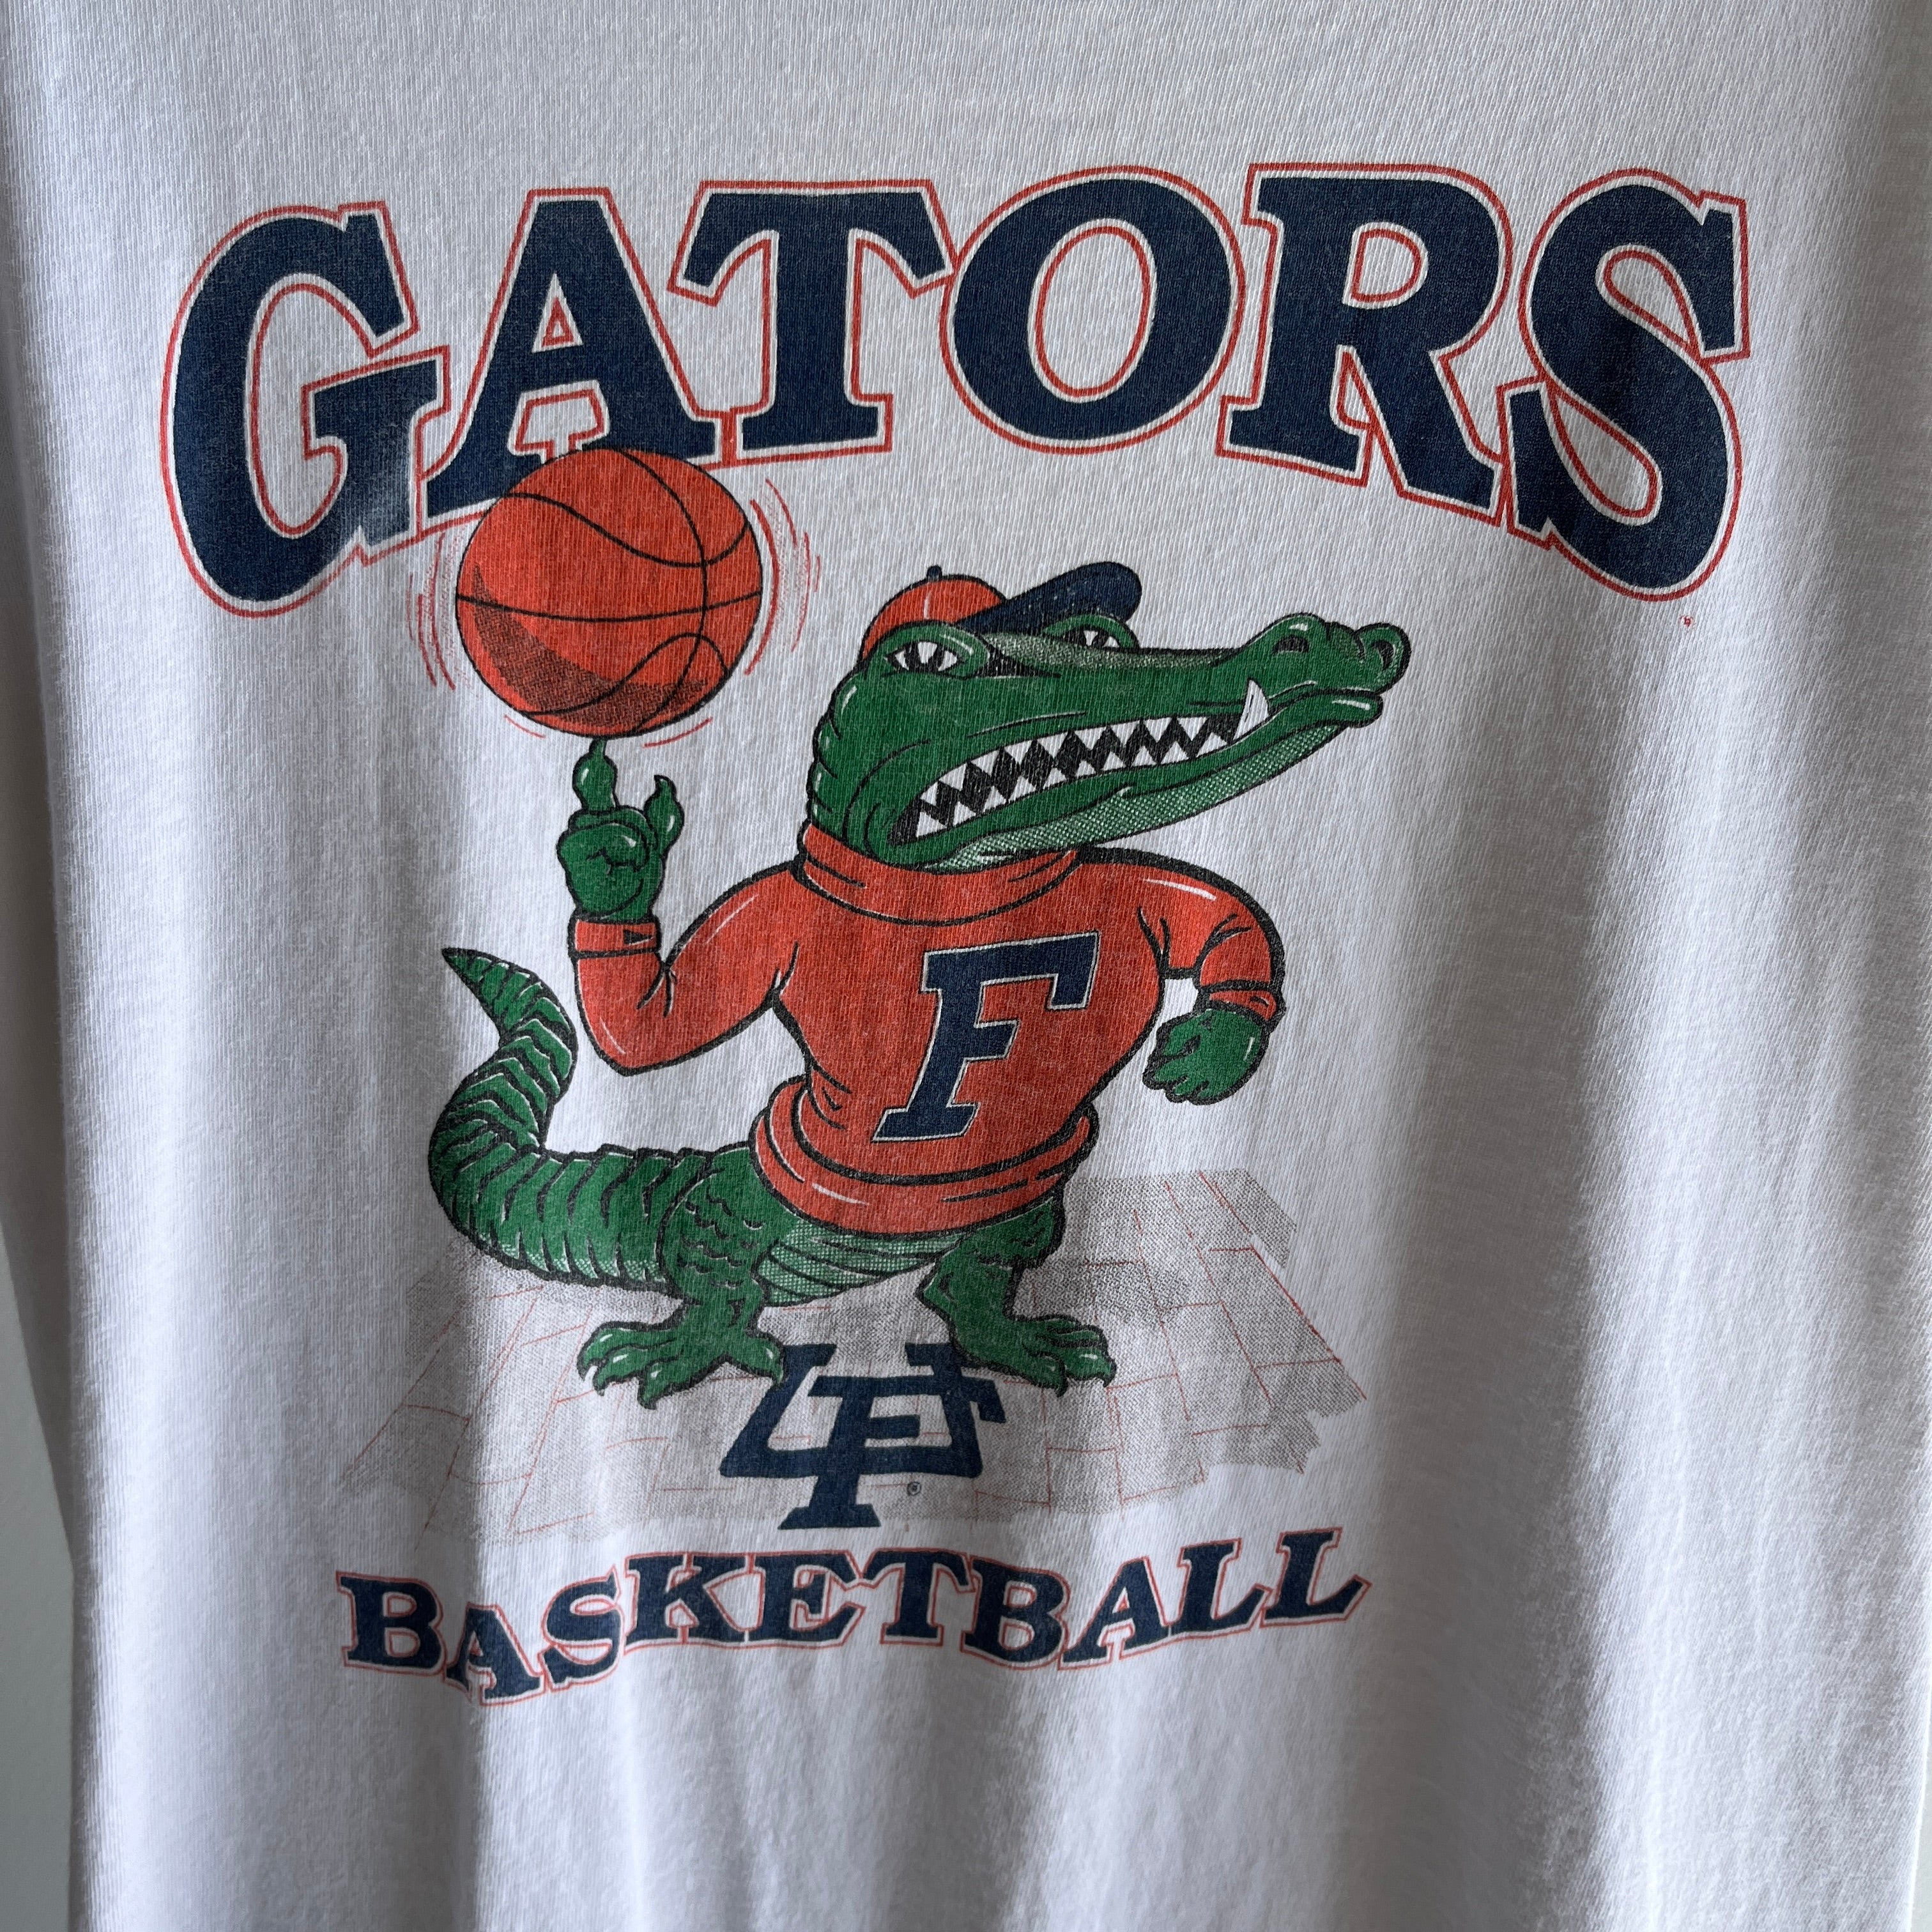 1980/90s Florida Gators Perfectly Worn Out T-Shirt